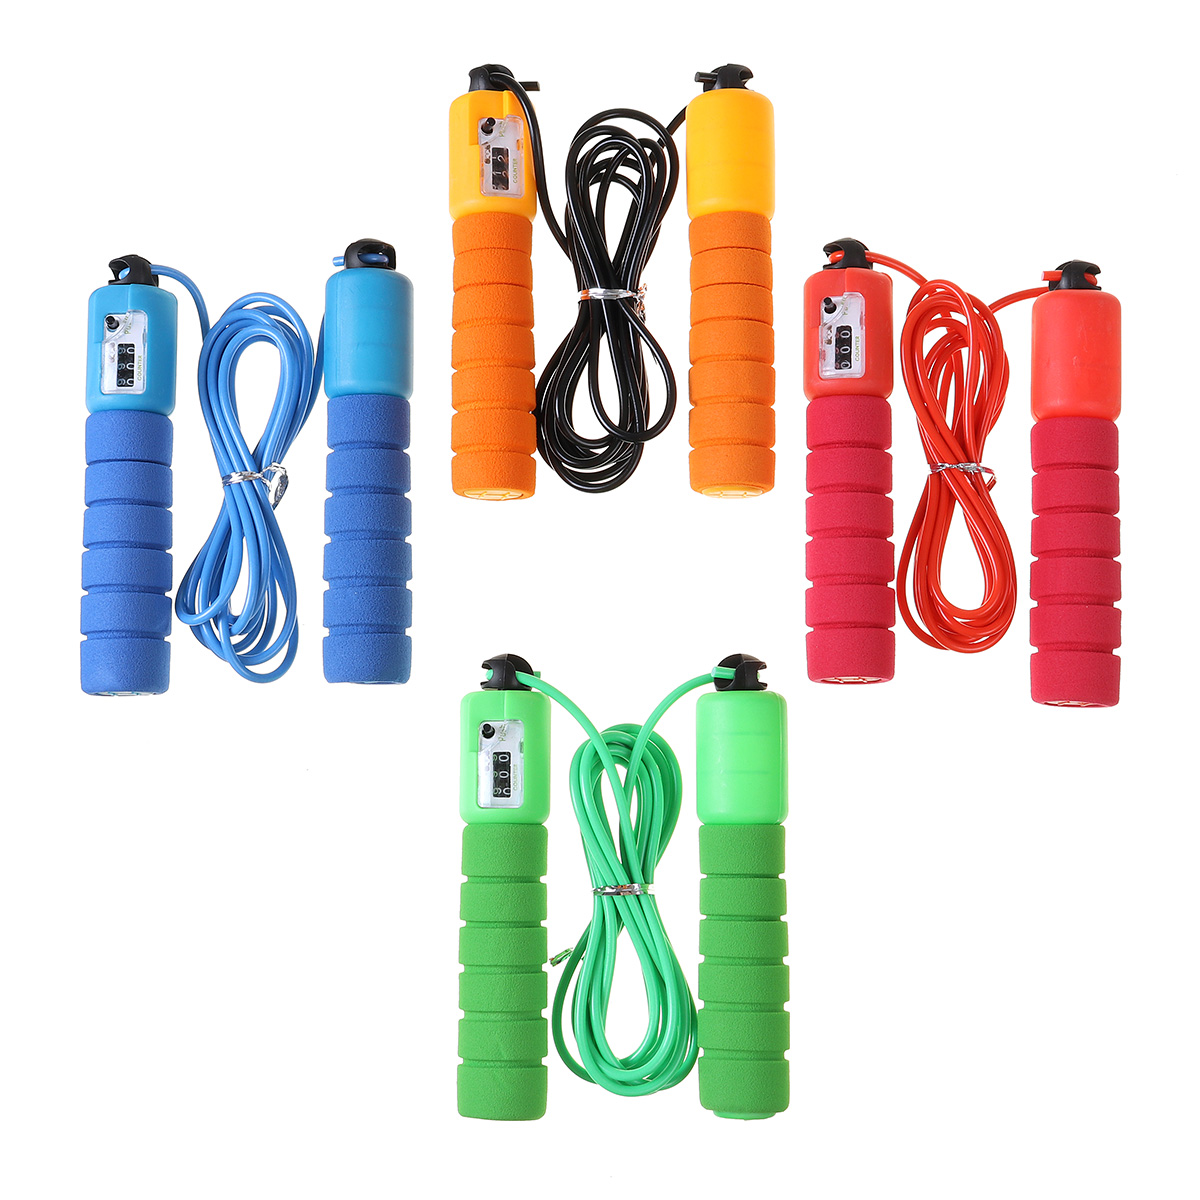 287cm-Rope-Jumping-Home-Adjustable-Speed-Training-Sport-Fitness-Skipping-Rope-1678695-2